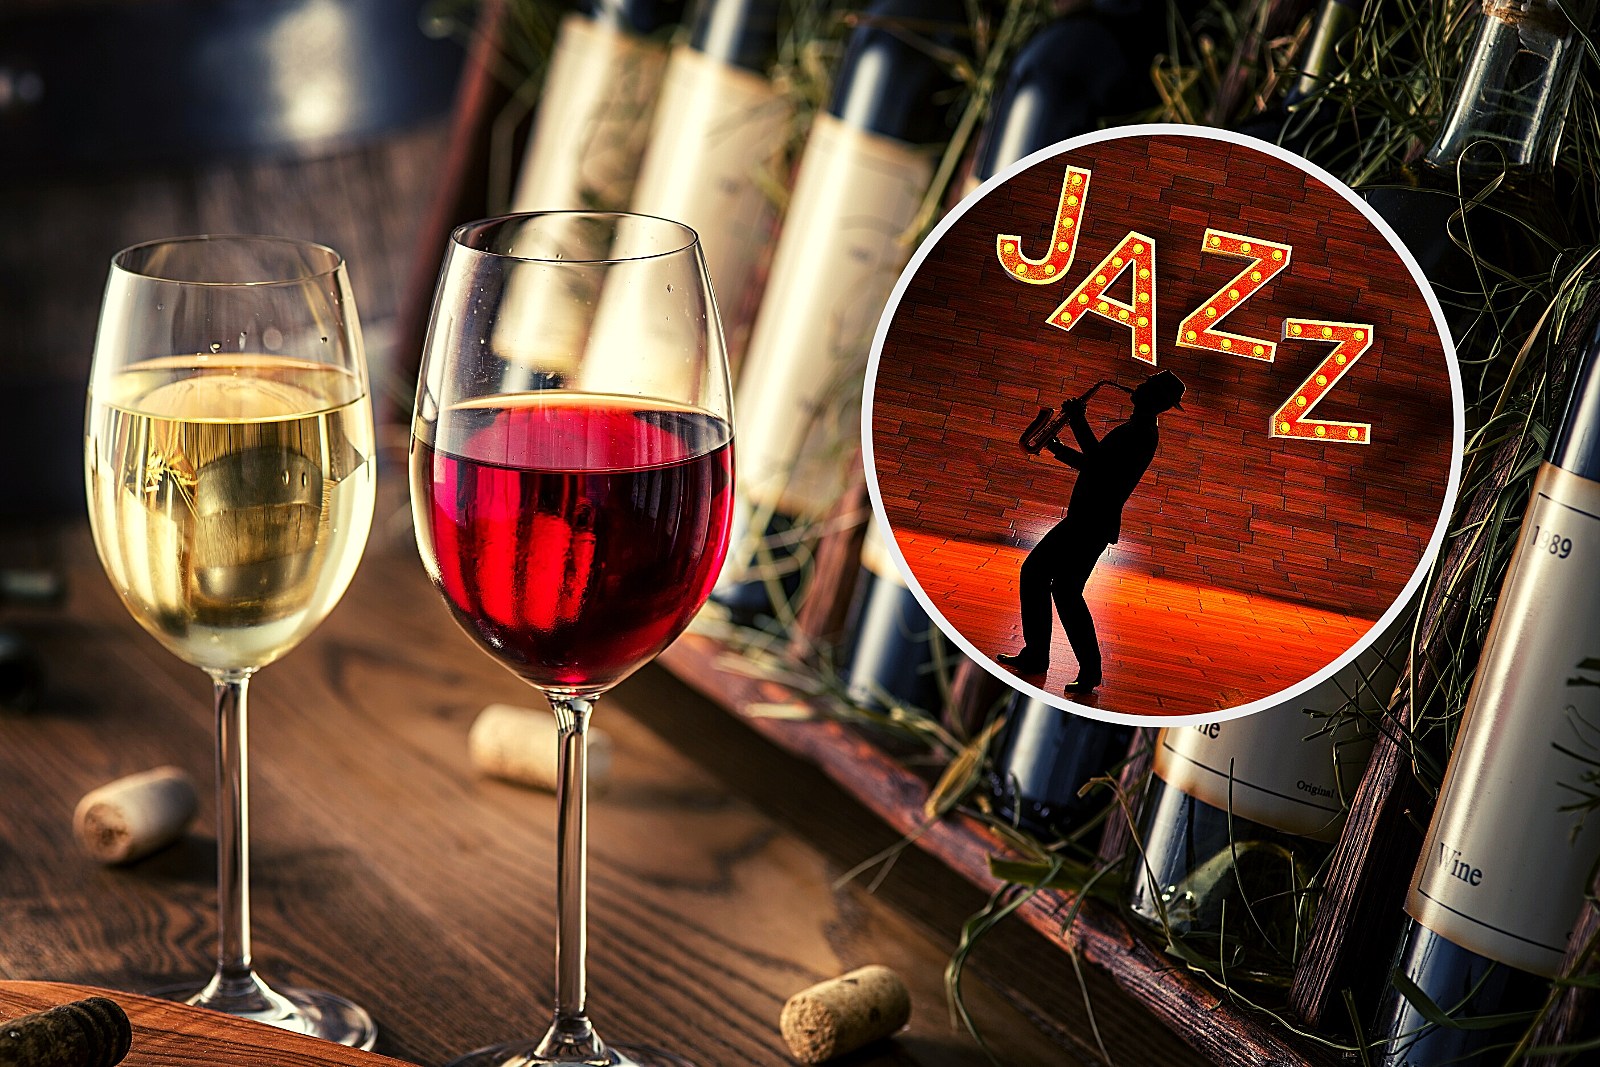 Join The Fun at 17th Annual Wine & Jazz Gala This Friday Night